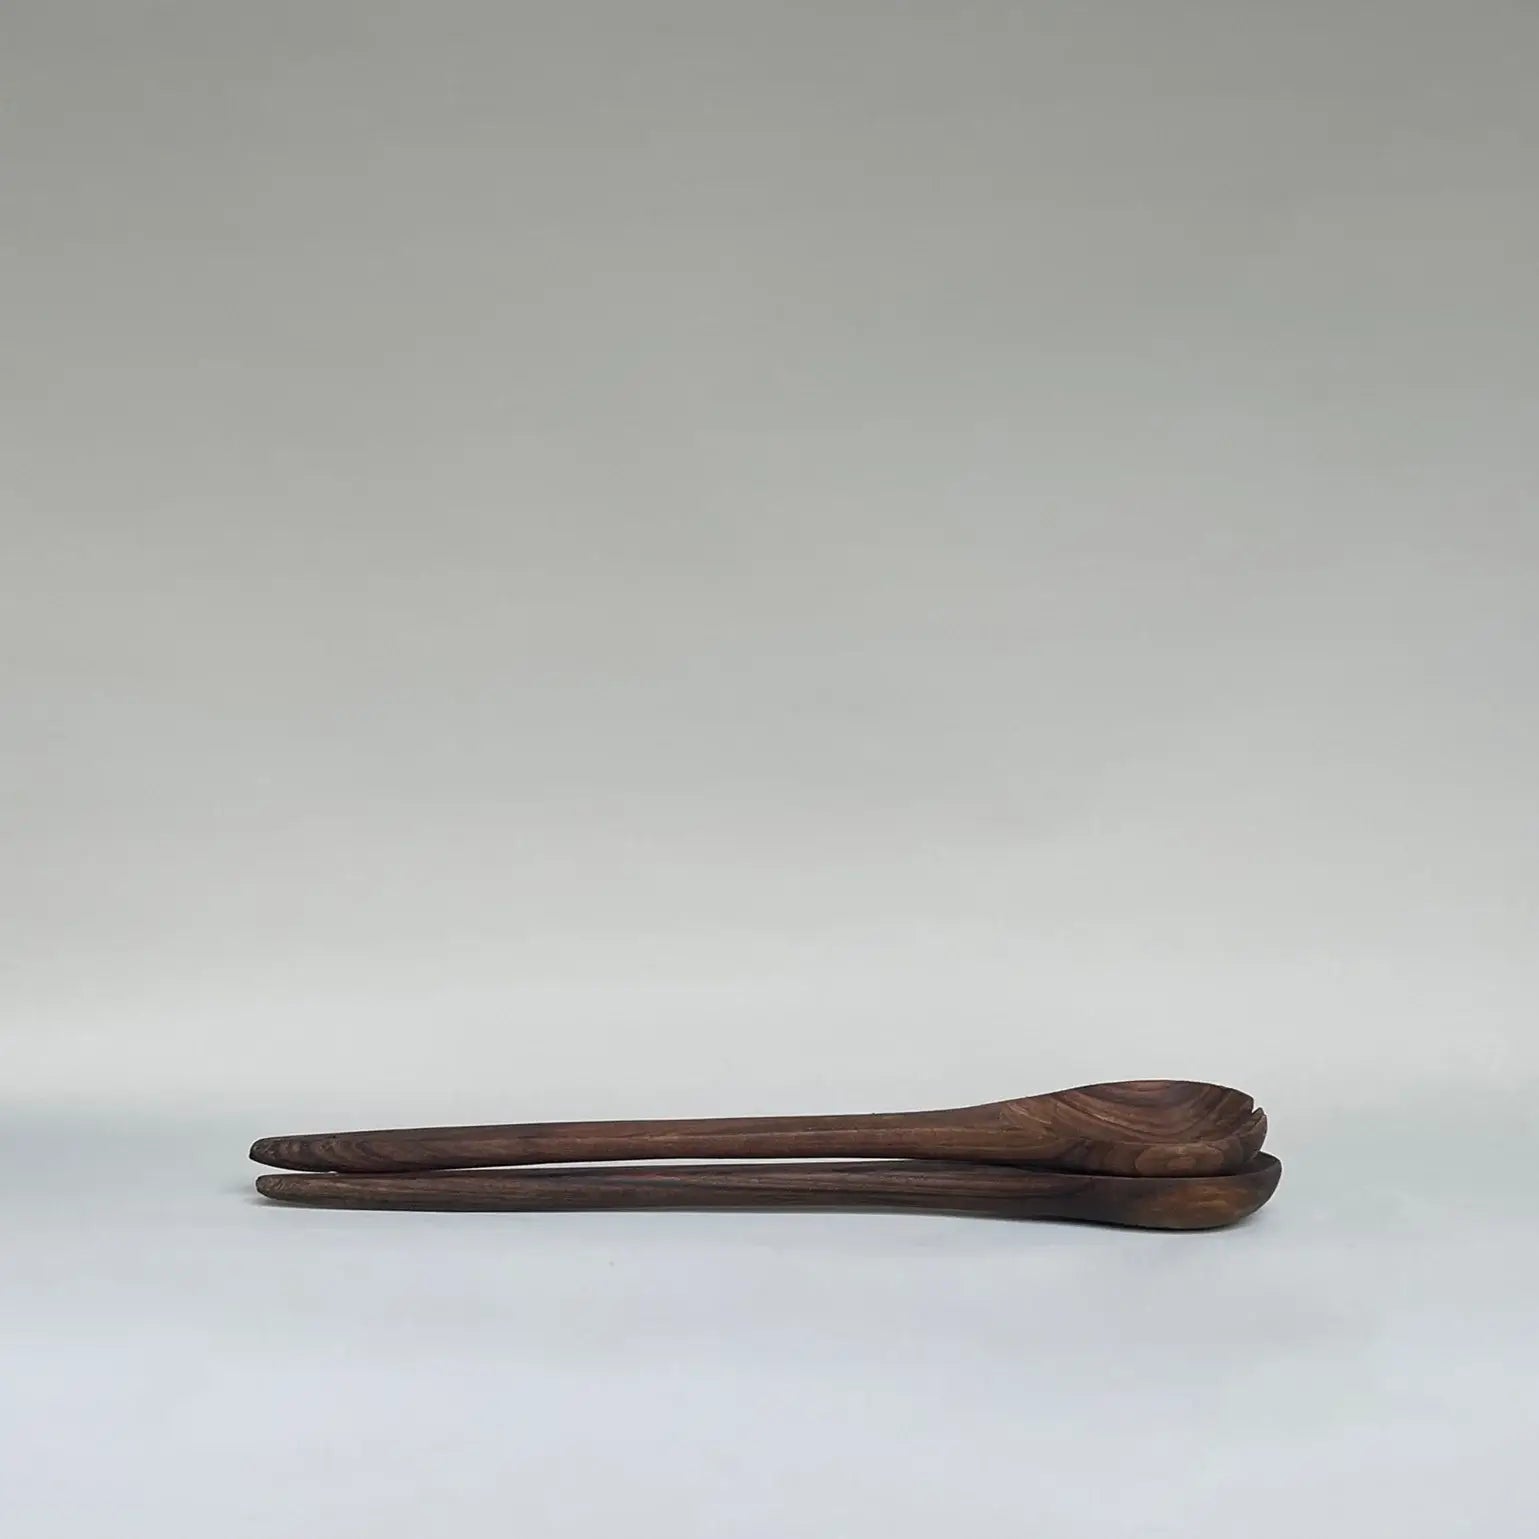 Dounia home Salade Serving spoons in  made of Walnut wood